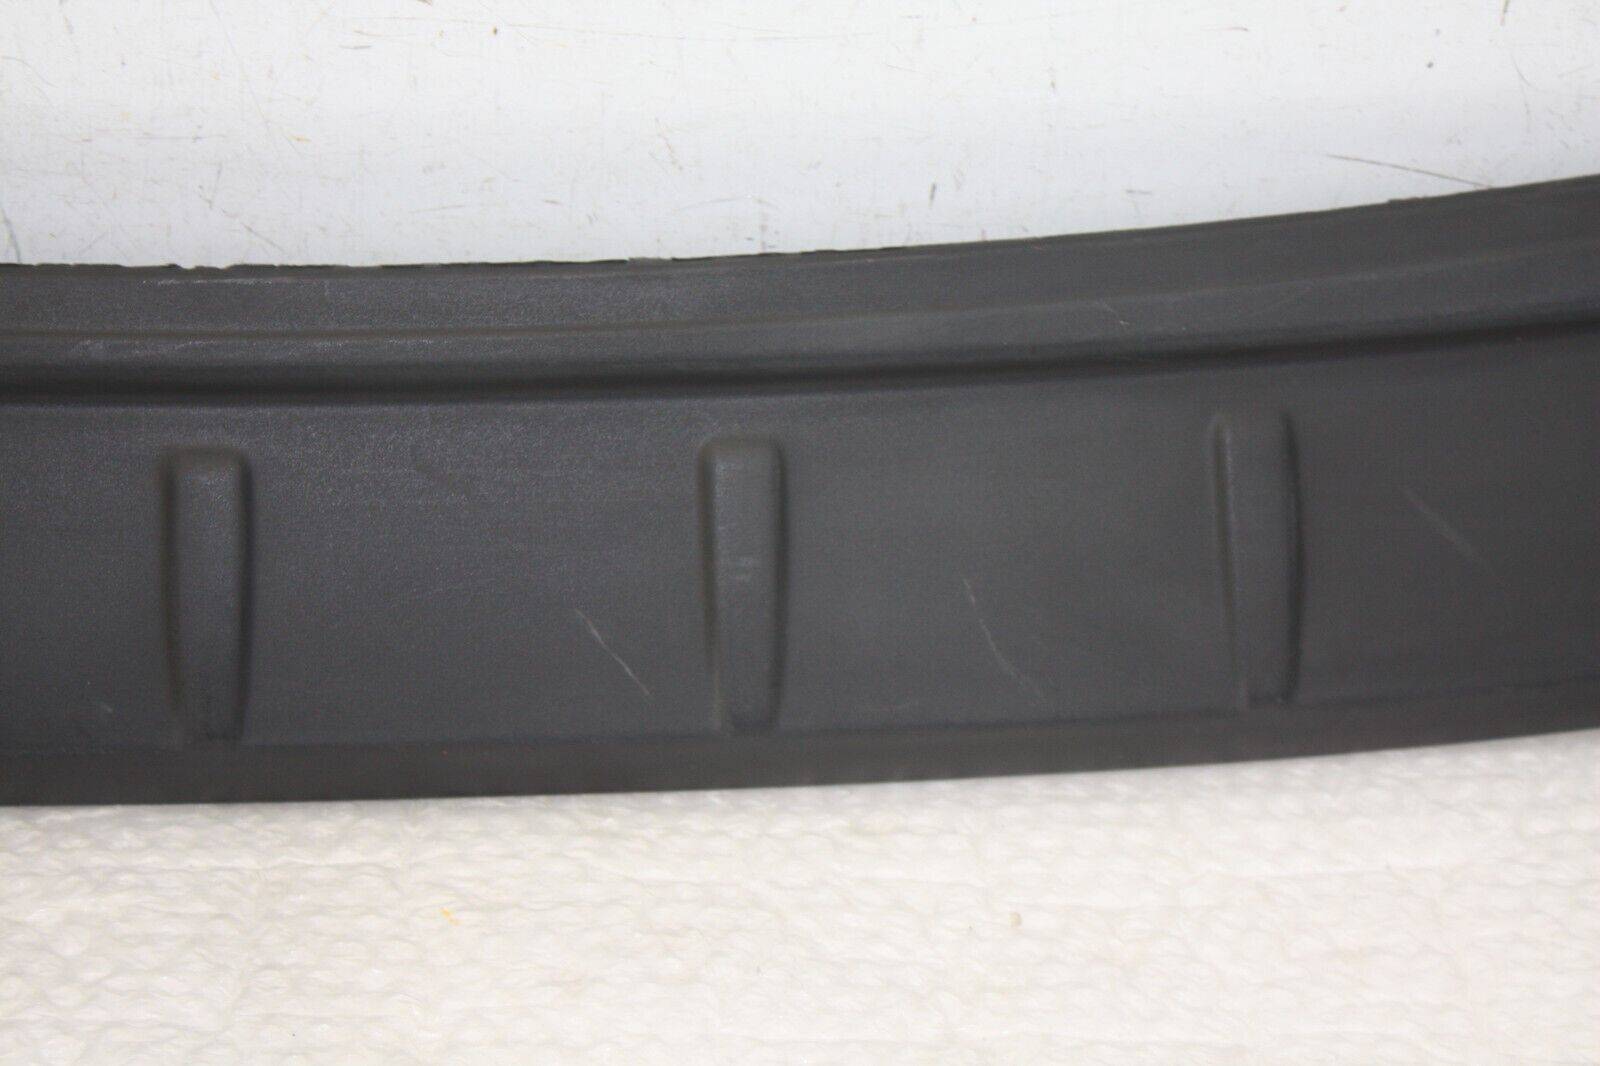 Volvo-XC60-Rear-Bumper-Protection-Cover-30764525-Genuine-FIXING-DAMAGED-176362657810-3